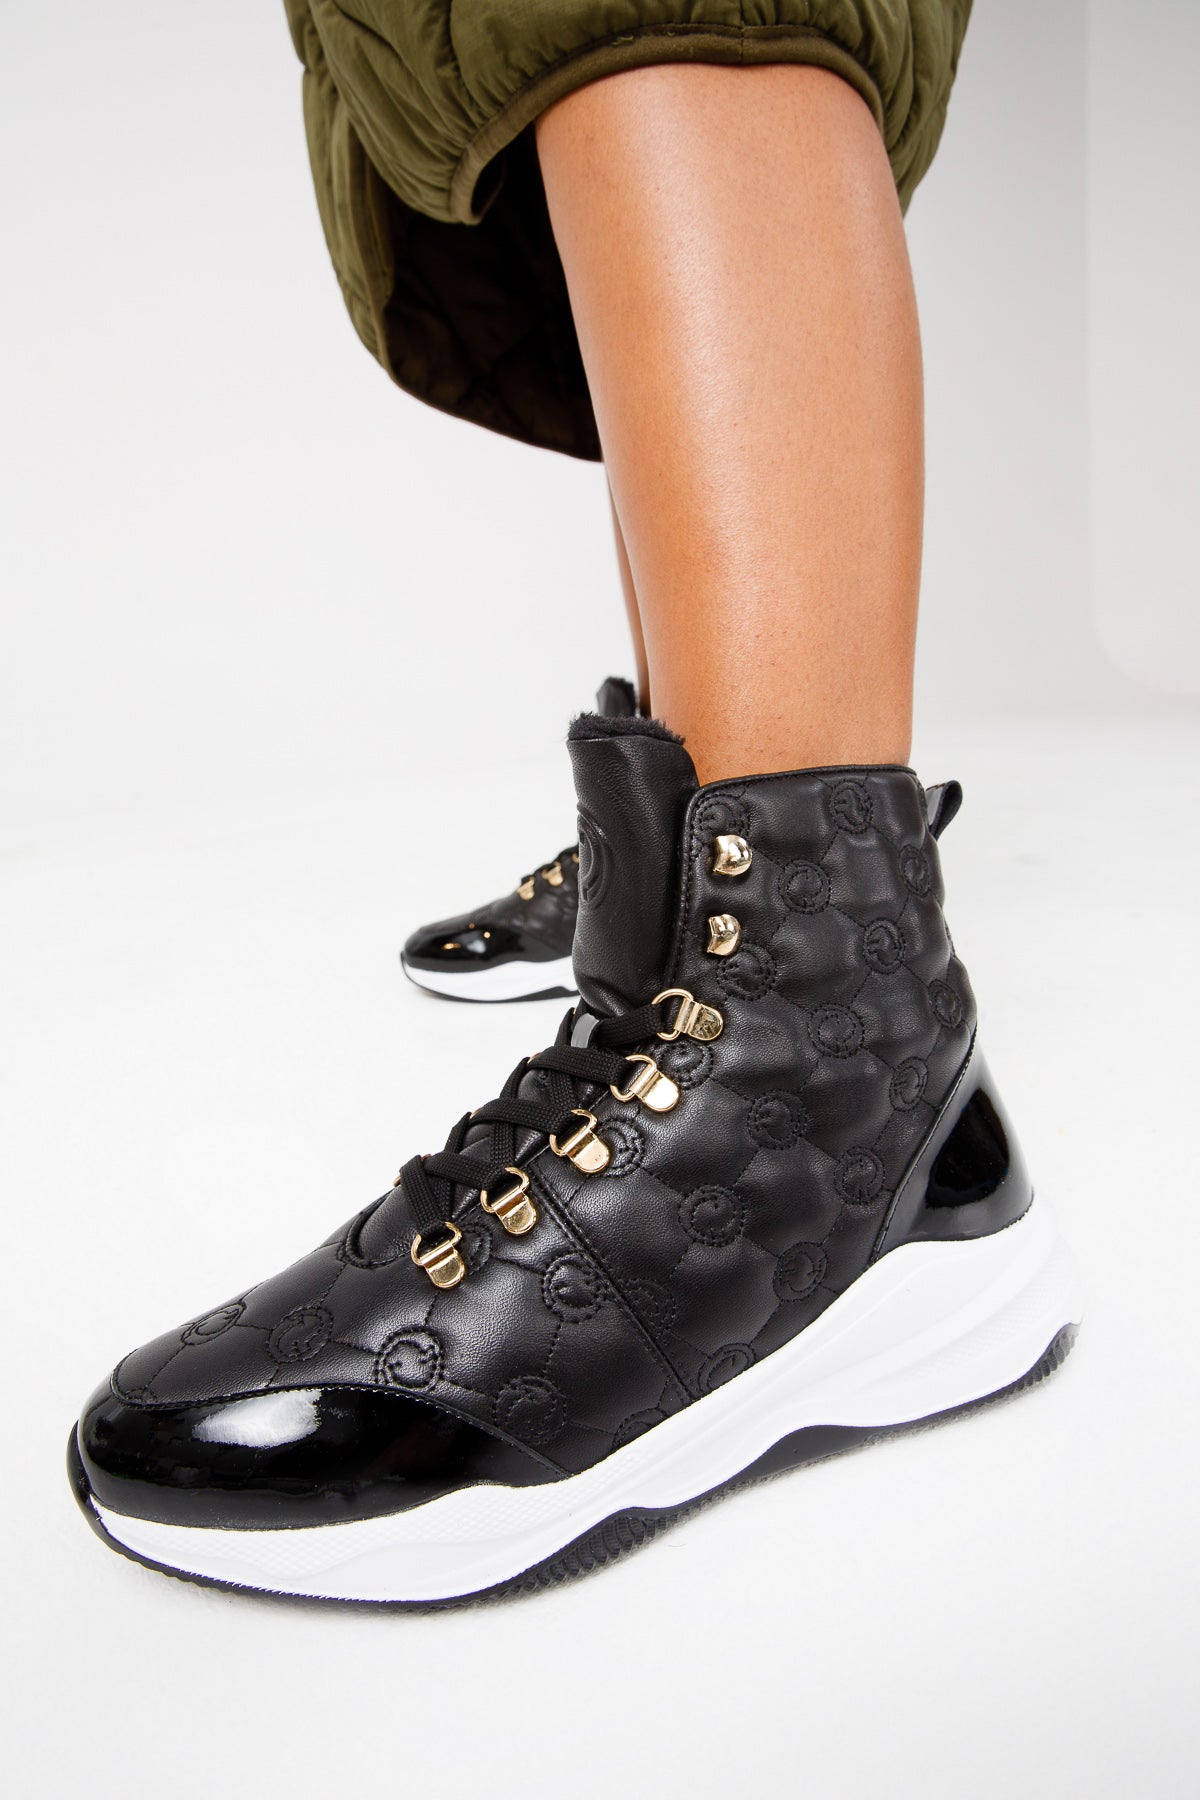 The Cambridge Black Quilted Leather Ankle Women Boot